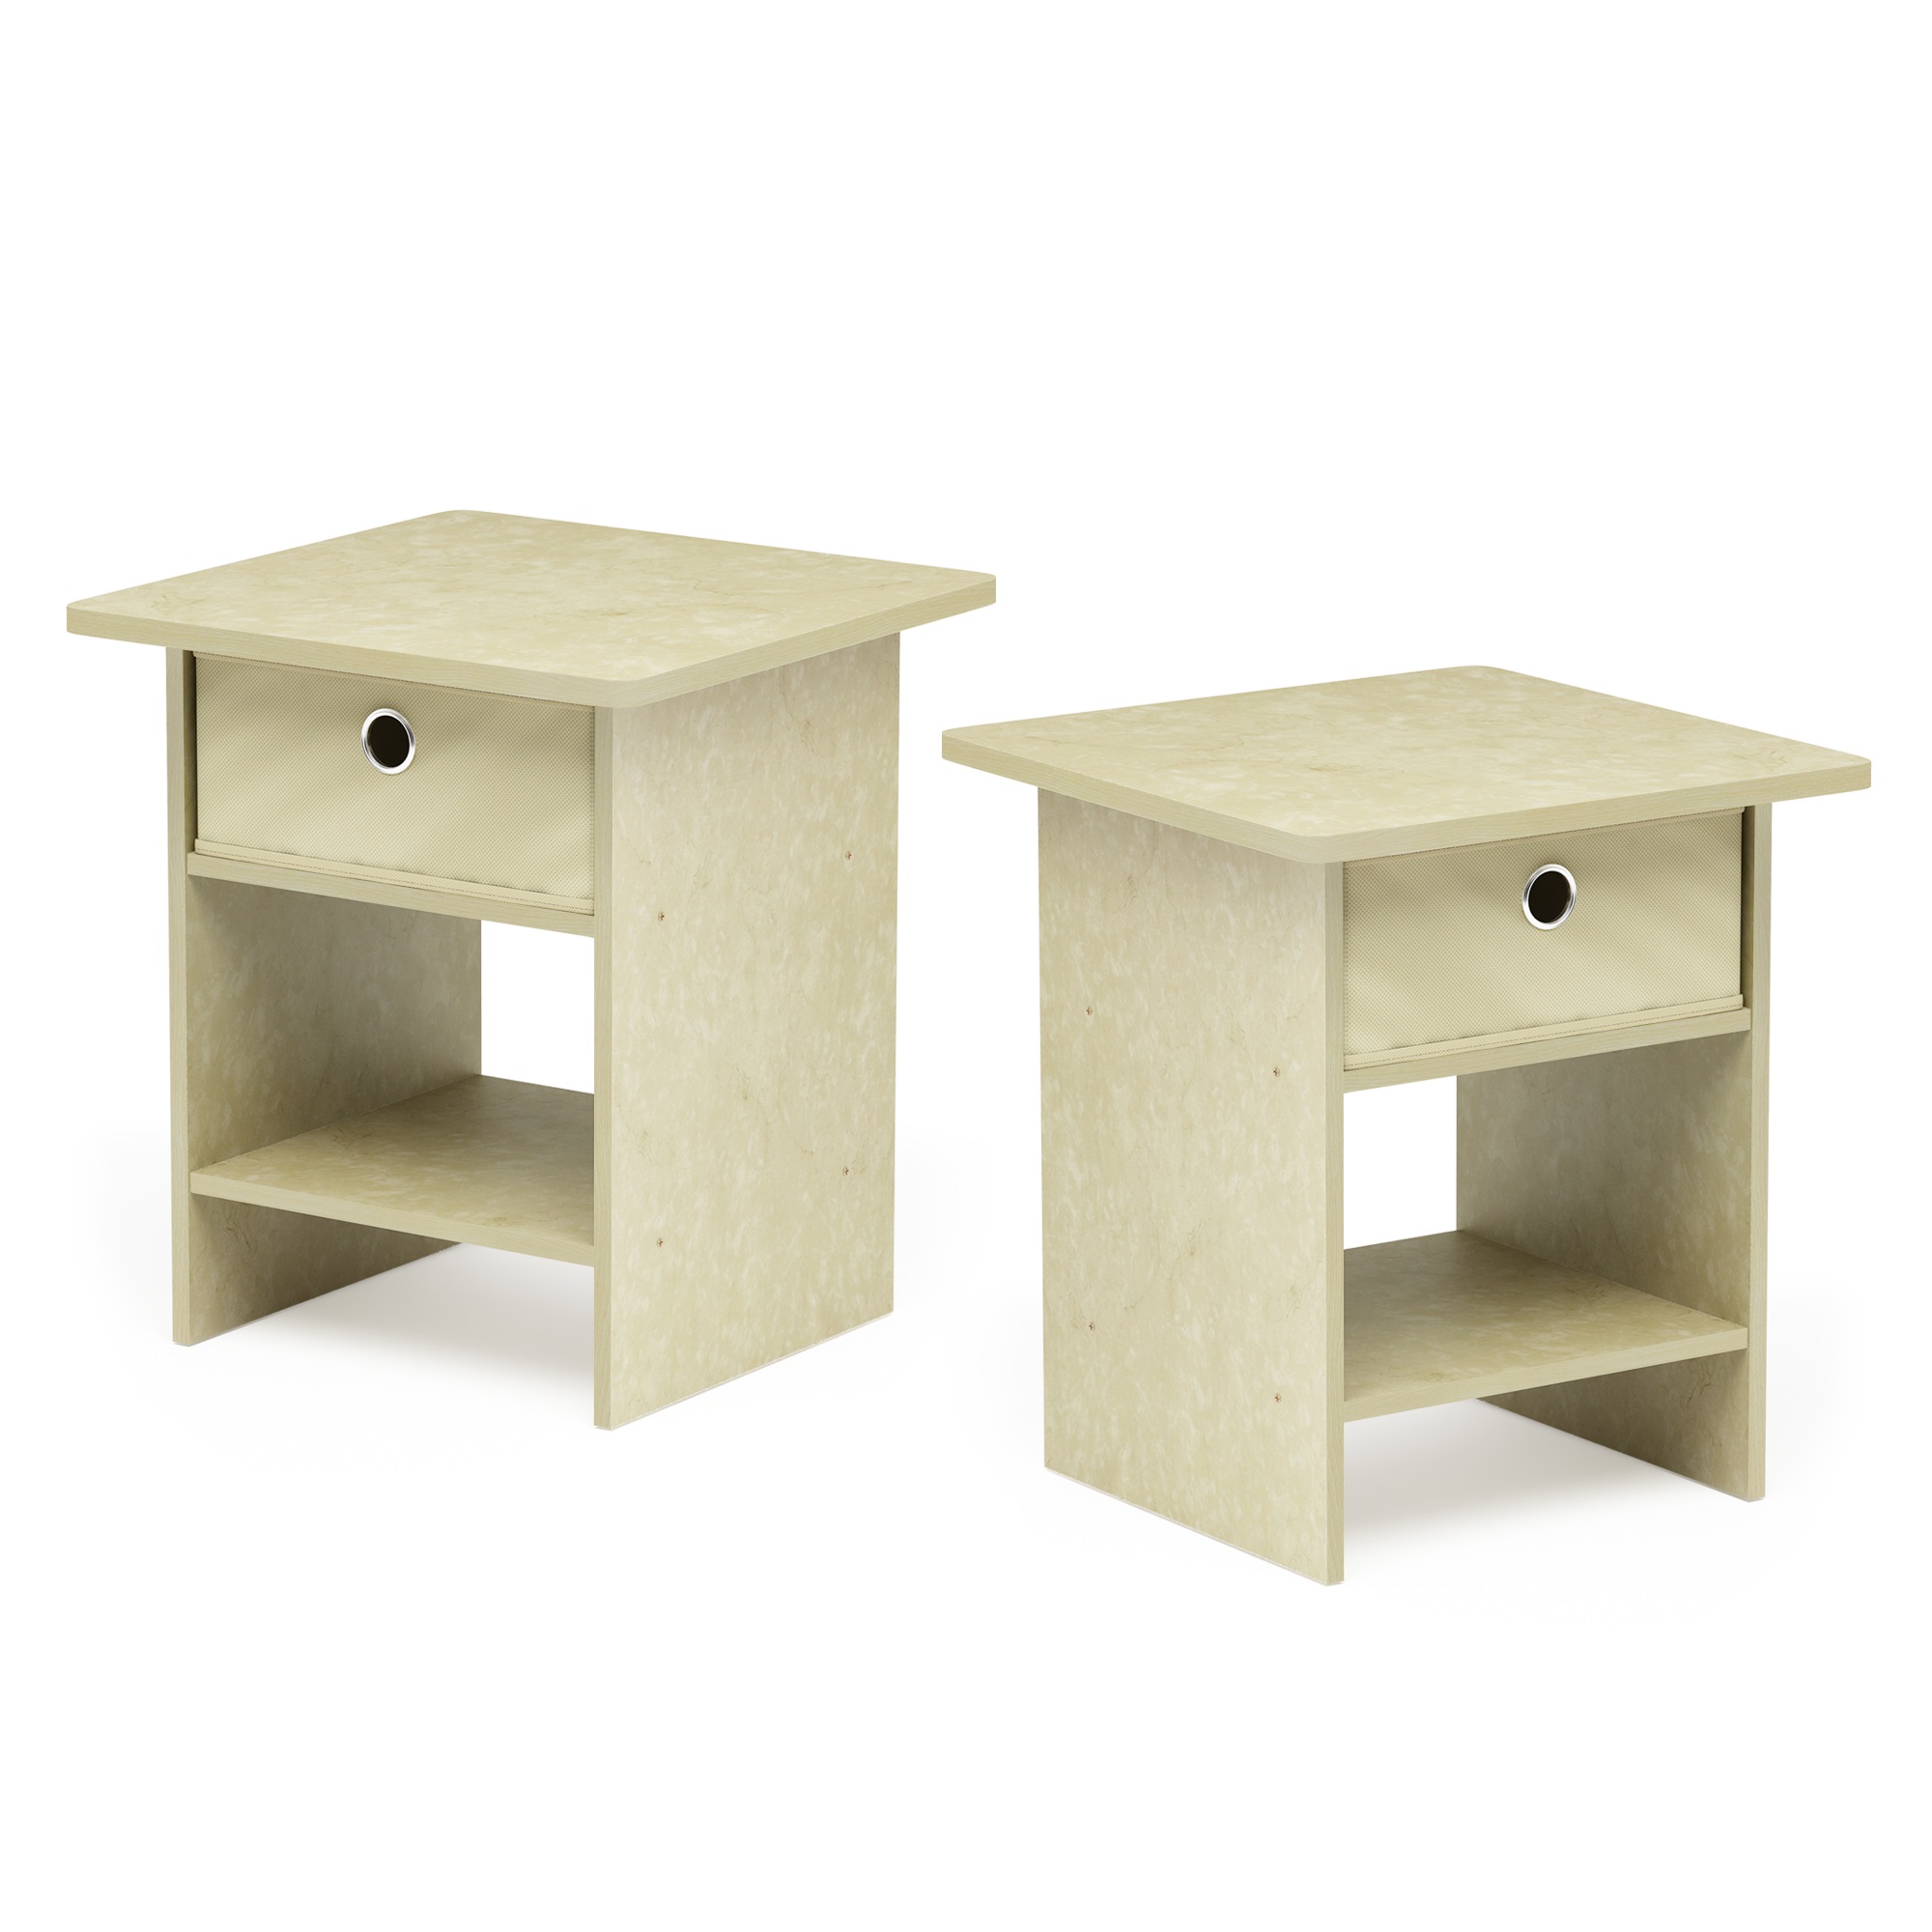 Furinno Dario End Table/ Night Stand Storage Shelf with Bin Drawer, Cream Faux Marble/Ivory, Set of 2